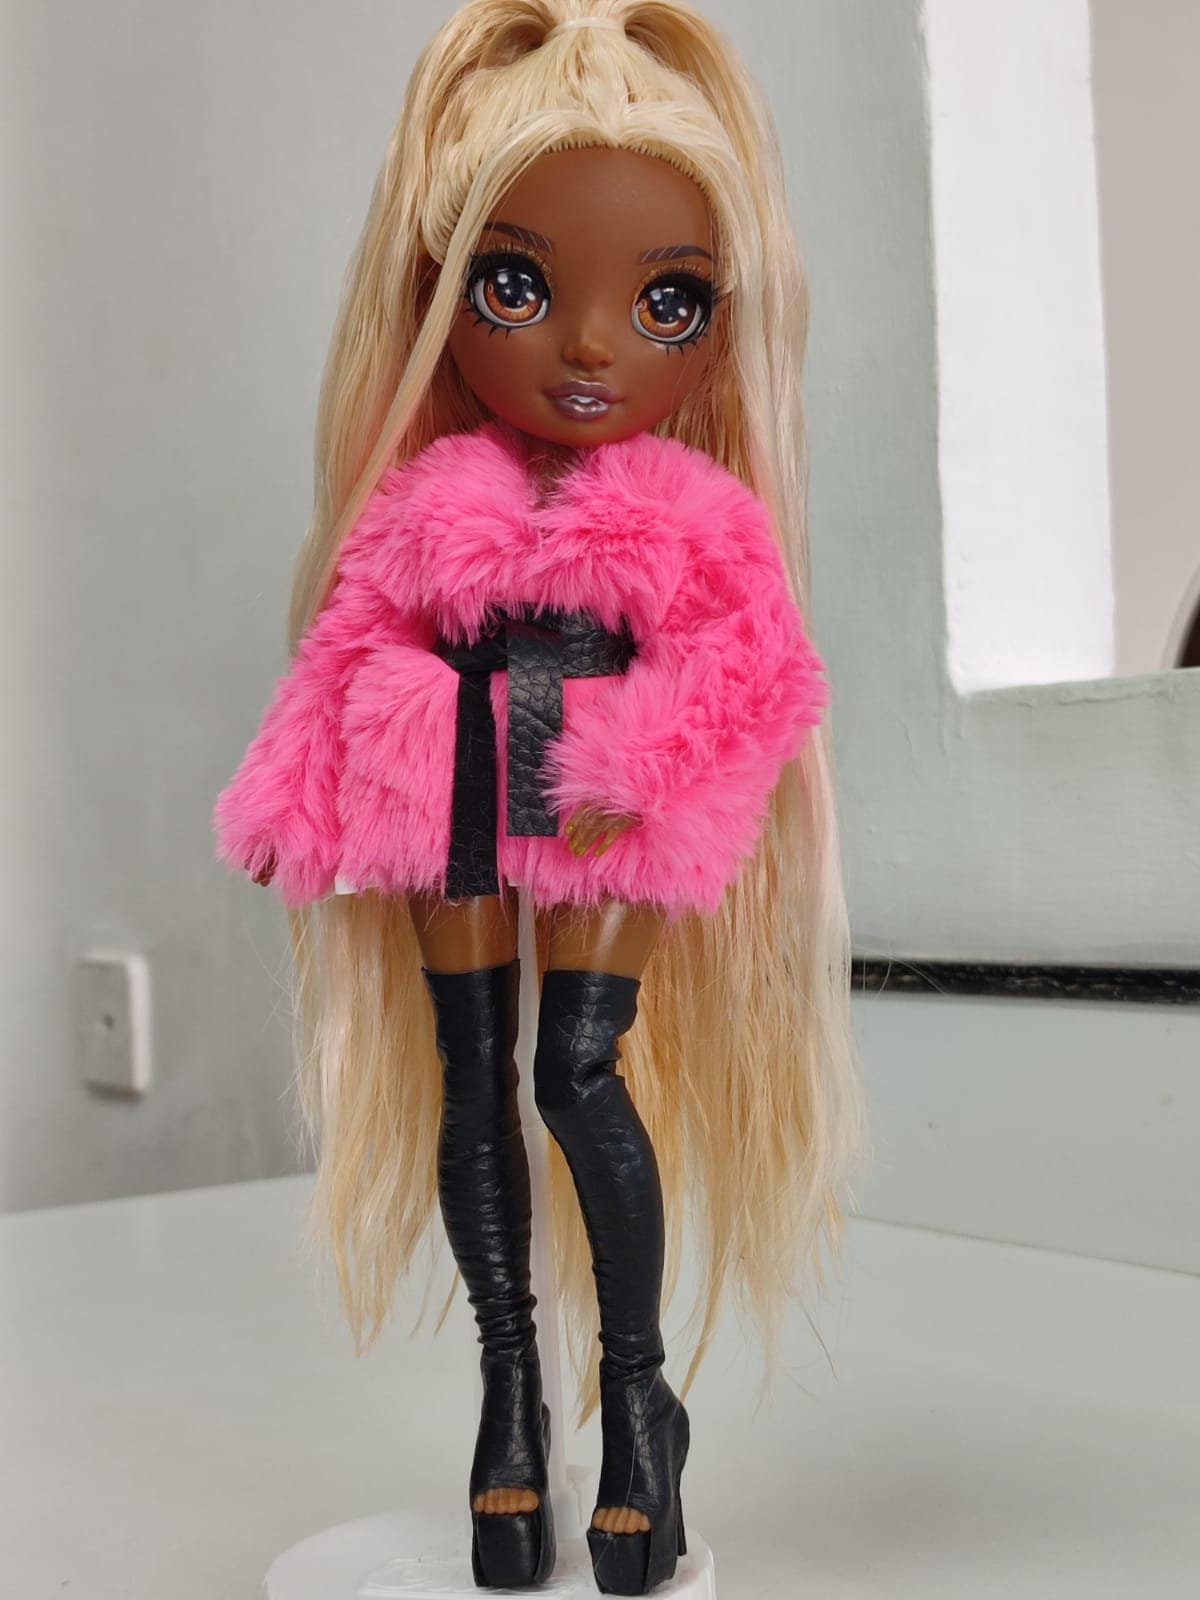 Outfit for Lol Omg Doll, Coat, Outfit 12 Doll, Outfit, Jacket, FR, Fur  Coat, Boots, Shoes, Shoes for Lol Omg -  Sweden